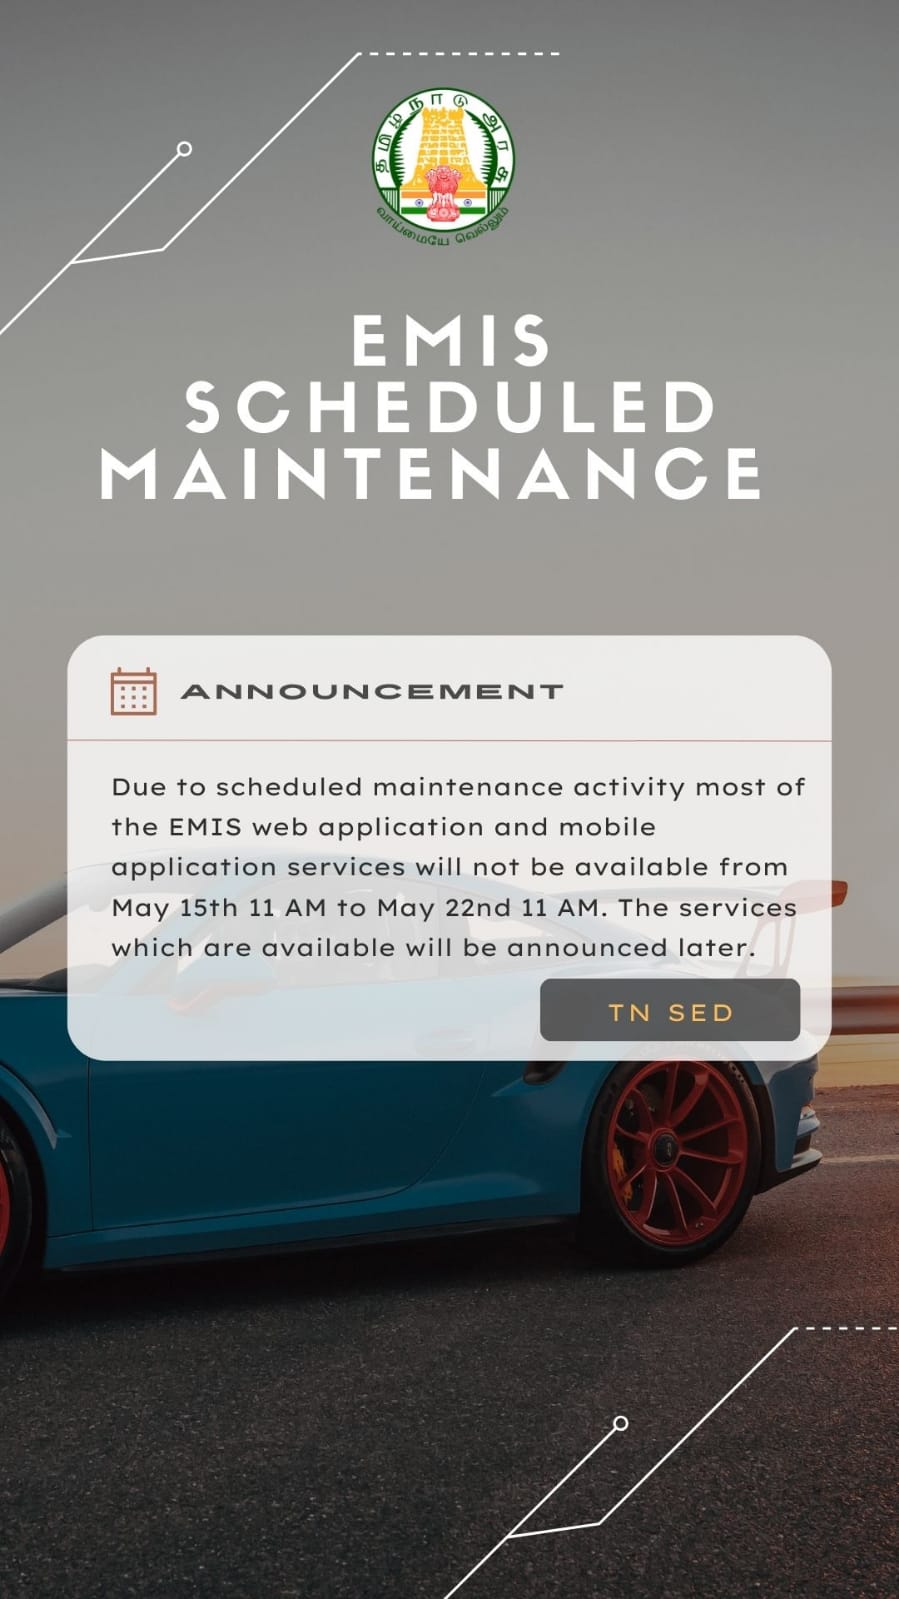 EMIS Maintenance- Emis web Application and Mobile Application services will not be available from May 15th to May 22...